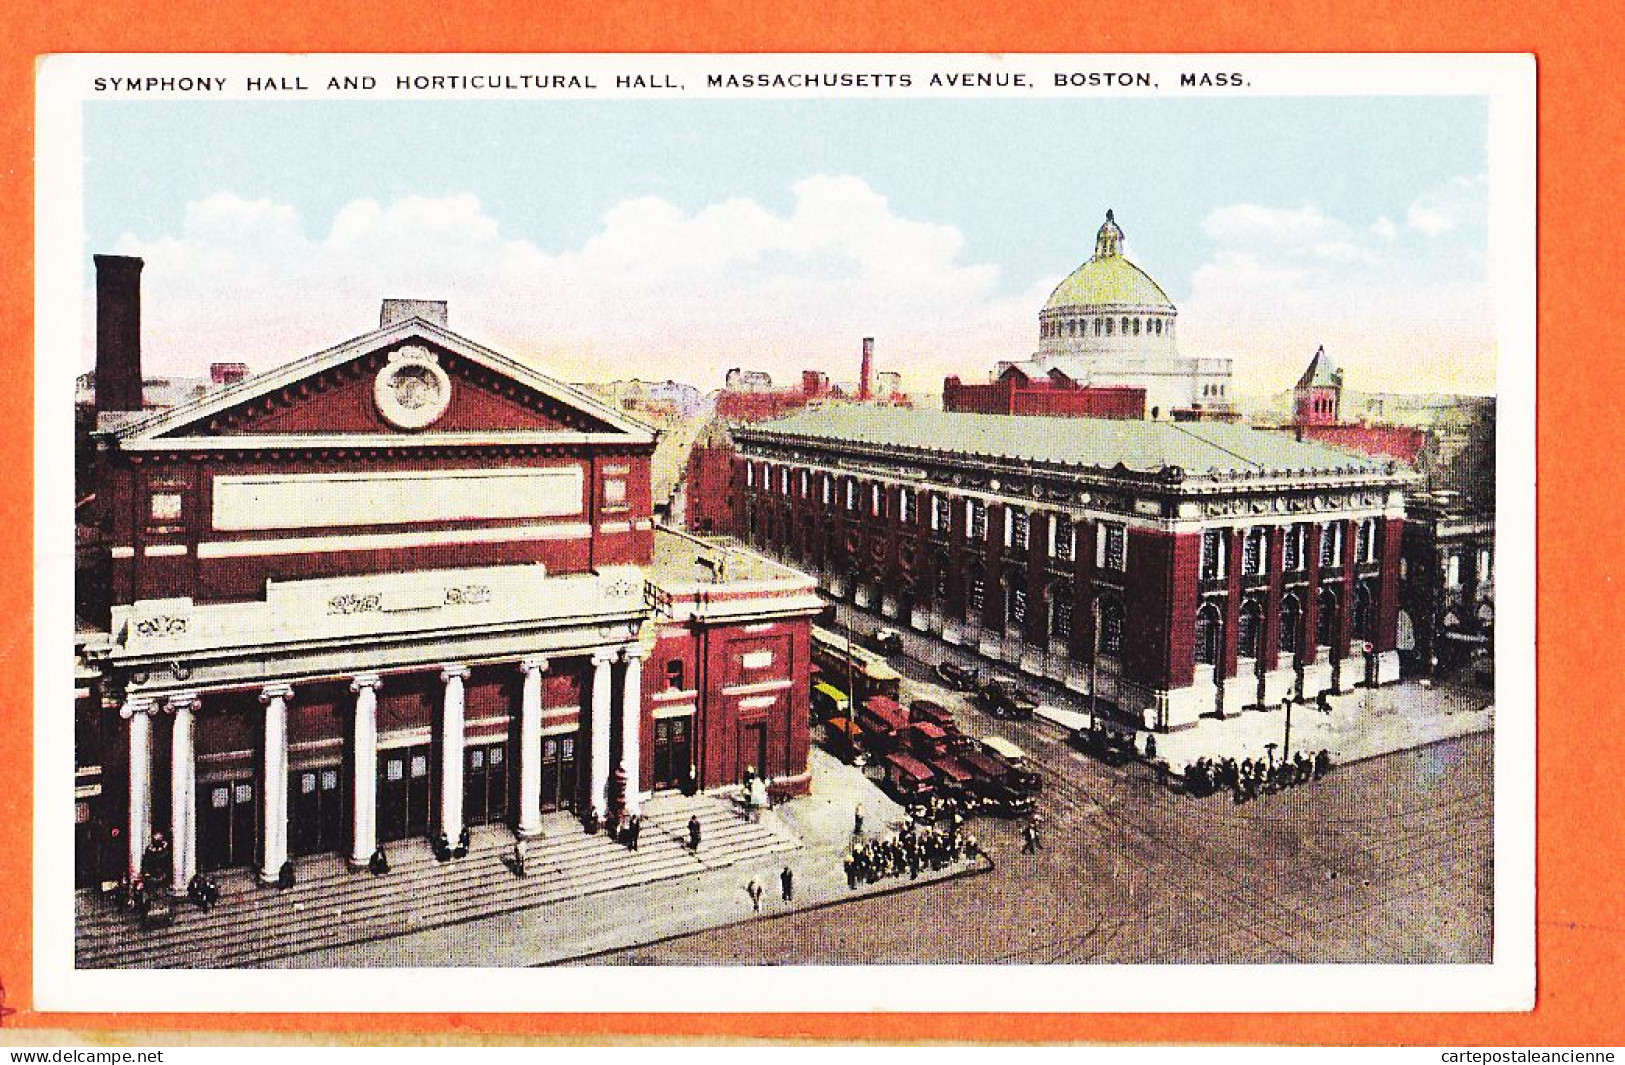 12328 / ⭐ BOSTON Massachusetts Avenue Symphony Hall And Horticultural Hall  1910s Published ABRAMS Roxbury Mass  - Boston